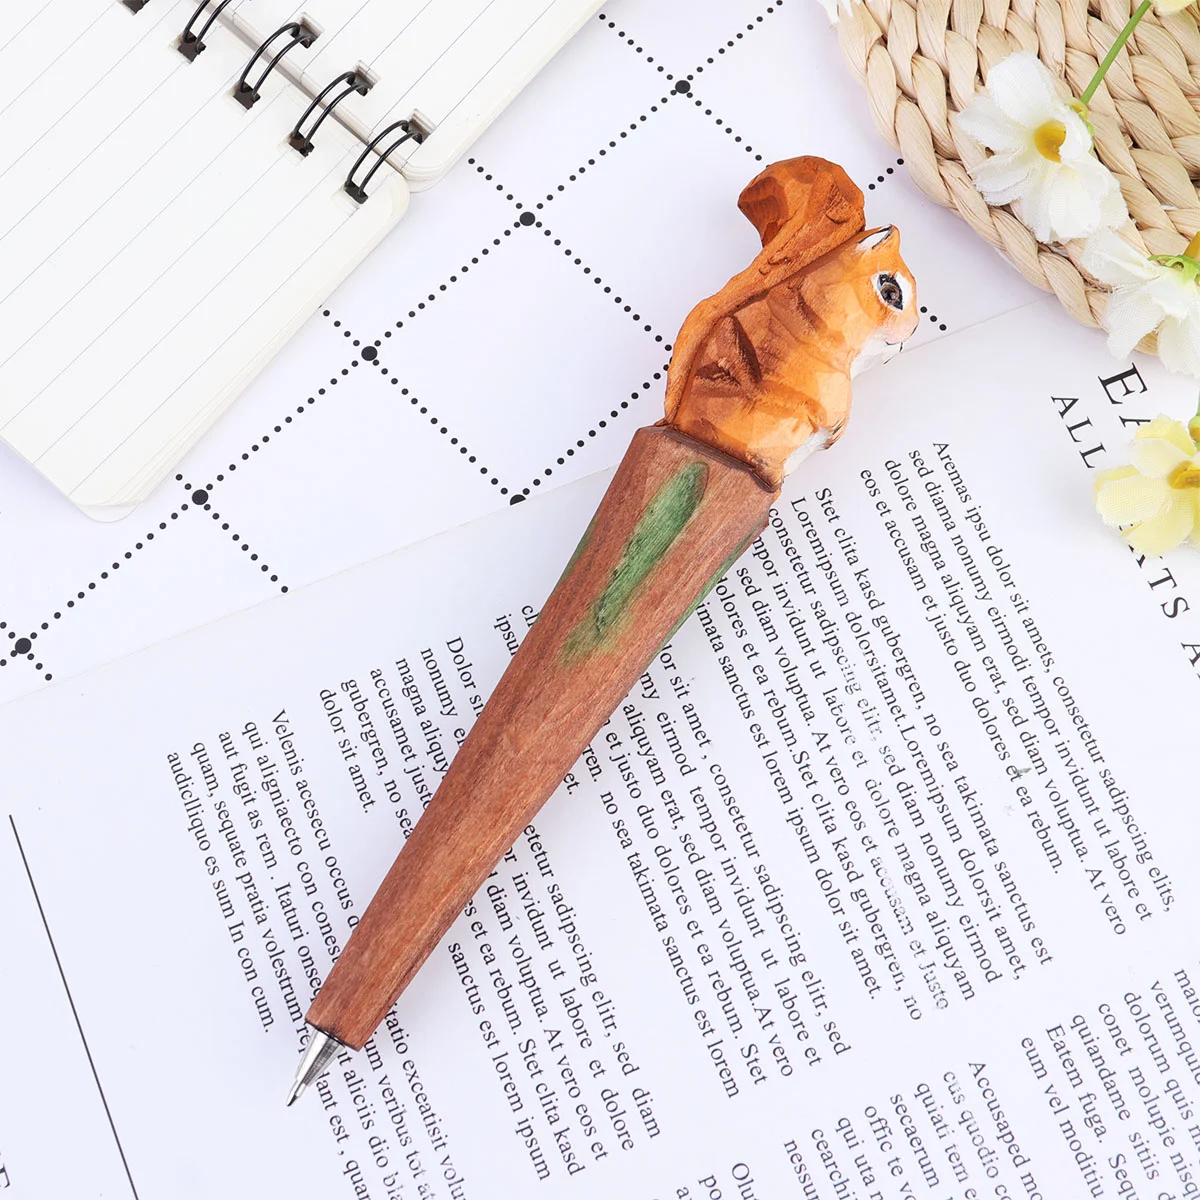 Pure Handmade Wood Carving Animal Pen Creative Wood Carving Squirrel Ballpoint Pen Replaceable Refill Gel Pen for Students 2pcs sturdy umbrella handle replacement replaceable umbrella grip wood umbrella grip replacement